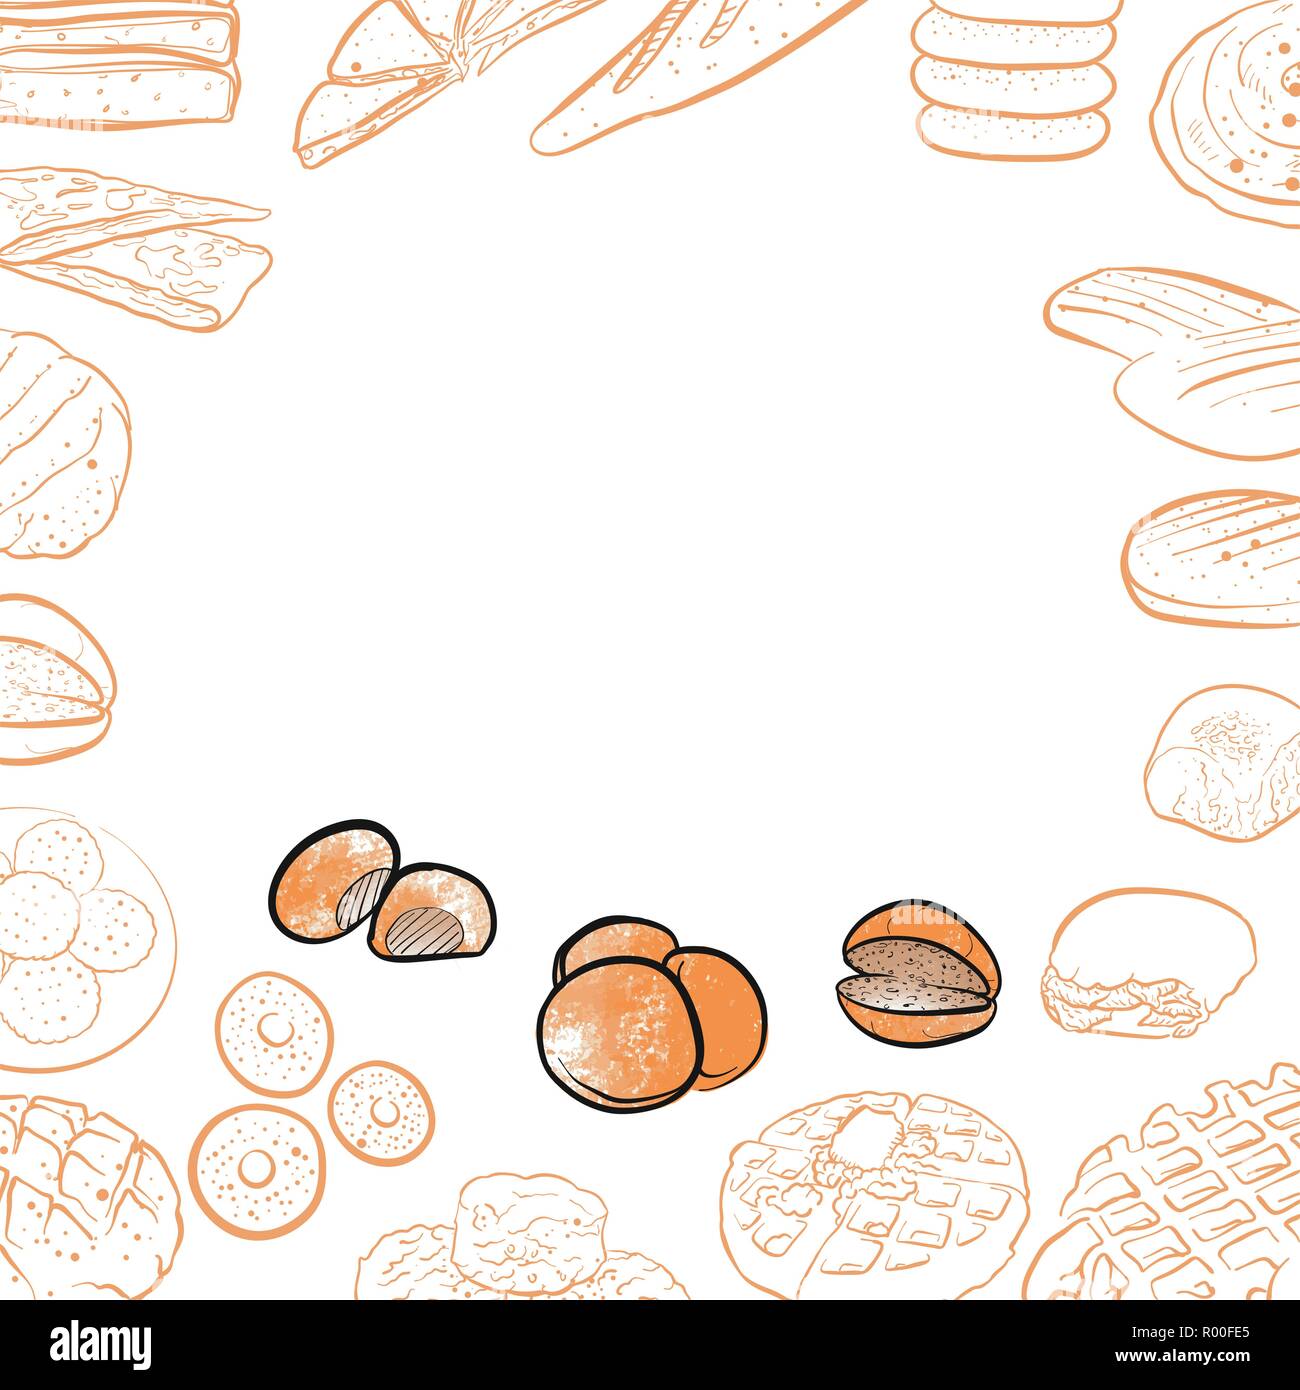 Bakery icons on vintage background. Vector food illustration. Stock Vector